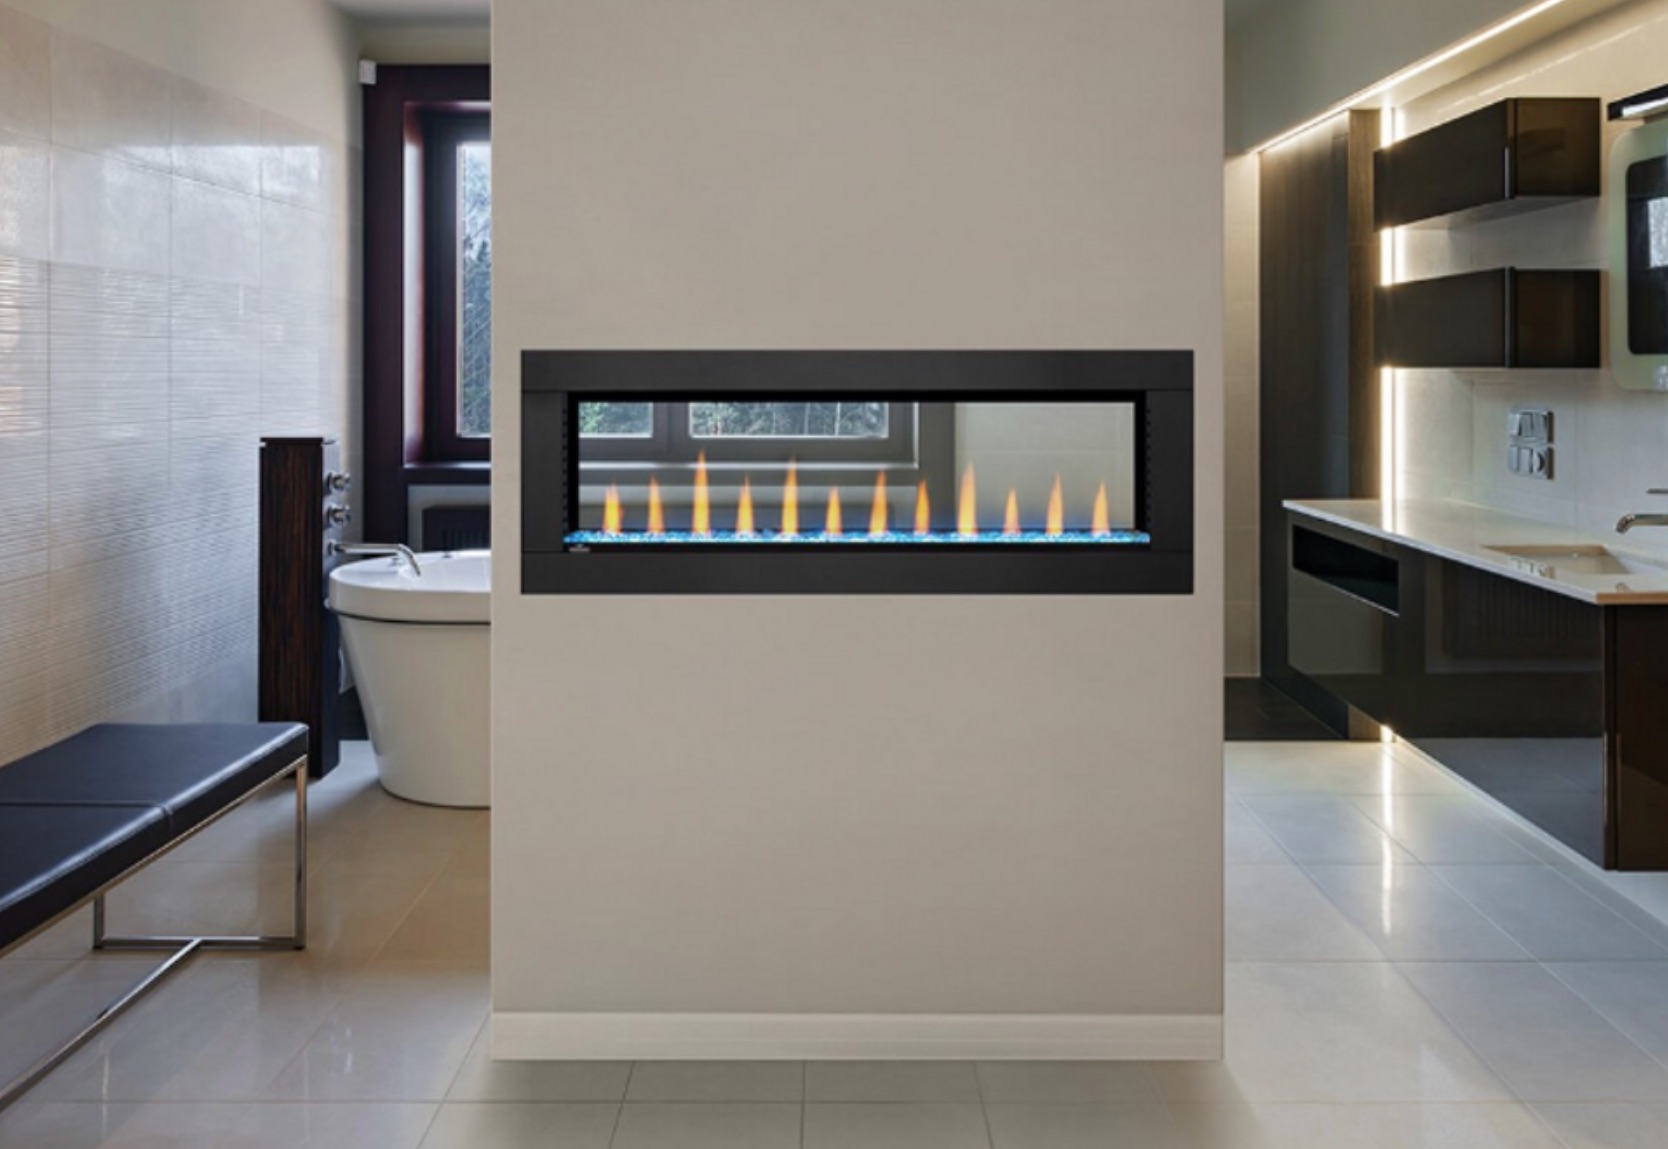 Napoleon CLEARion Elite 50" See-Through Built-In Electric Fireplace in bathroom